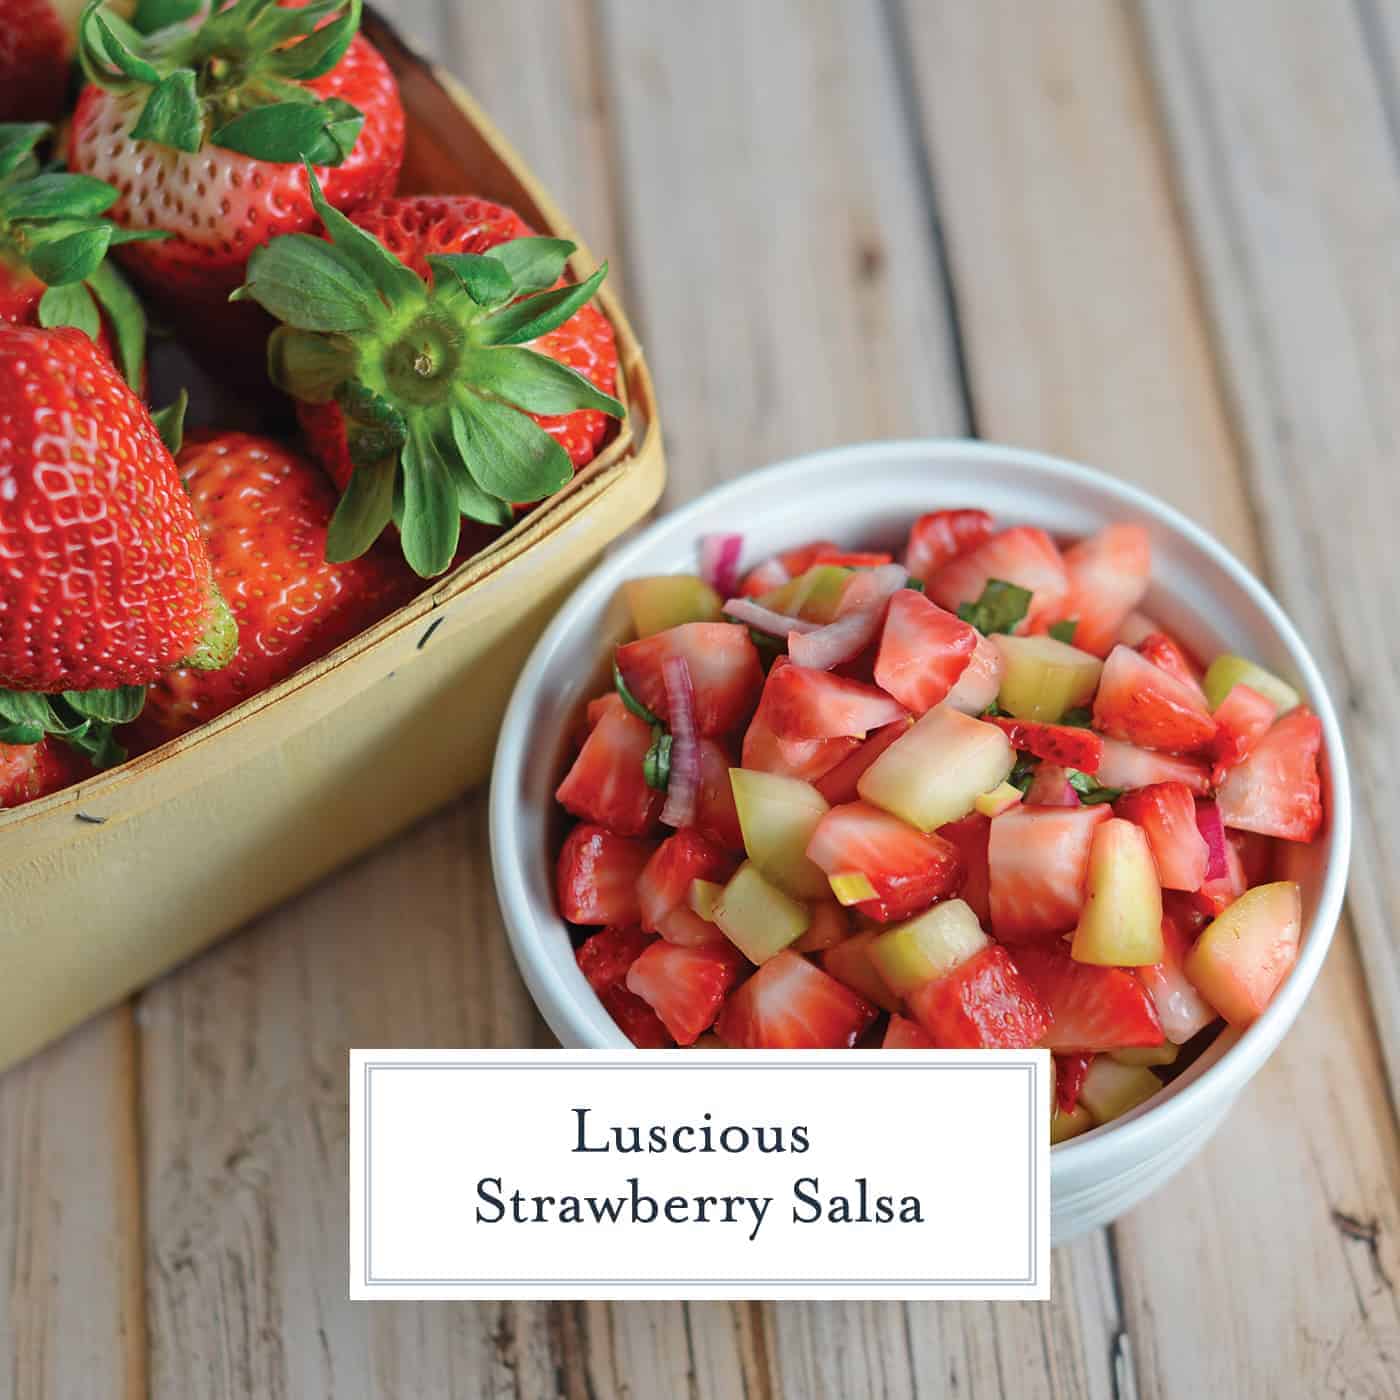 This Strawberry Salsa recipe uses sweet strawberries with cooling cucumber, red onion, basil and zesty white wine vinegar for a juicy dip or condiment. #homemadesalsa #fruitsalsa #strawberrysalsa www.savoryexperiments.com 